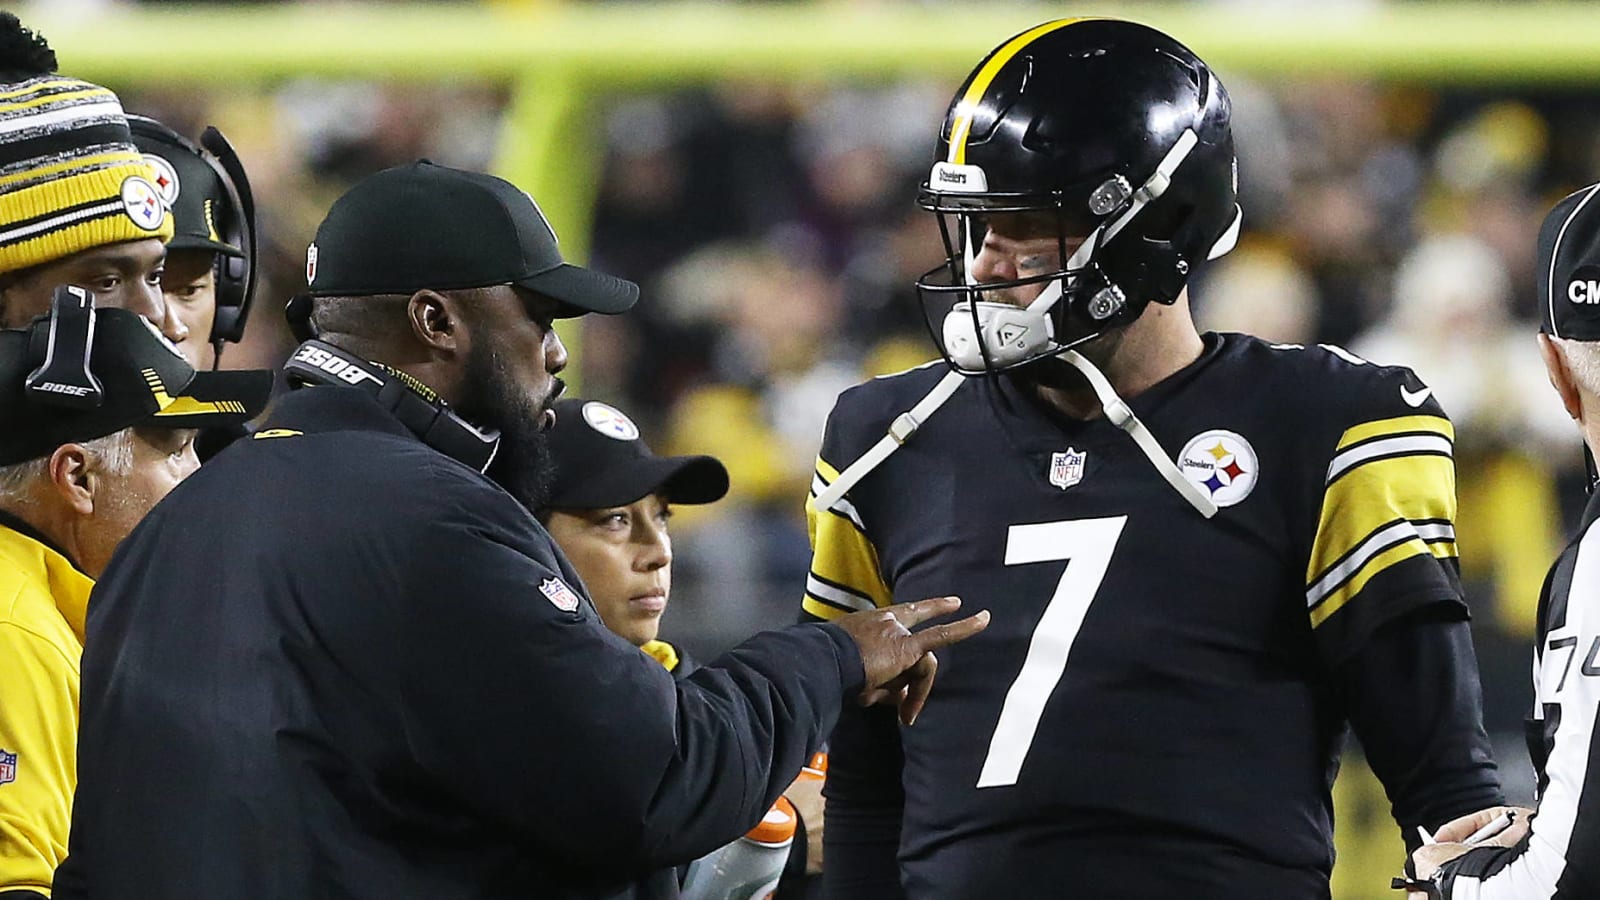 Roethlisberger appeared to have message for Tomlin after sack